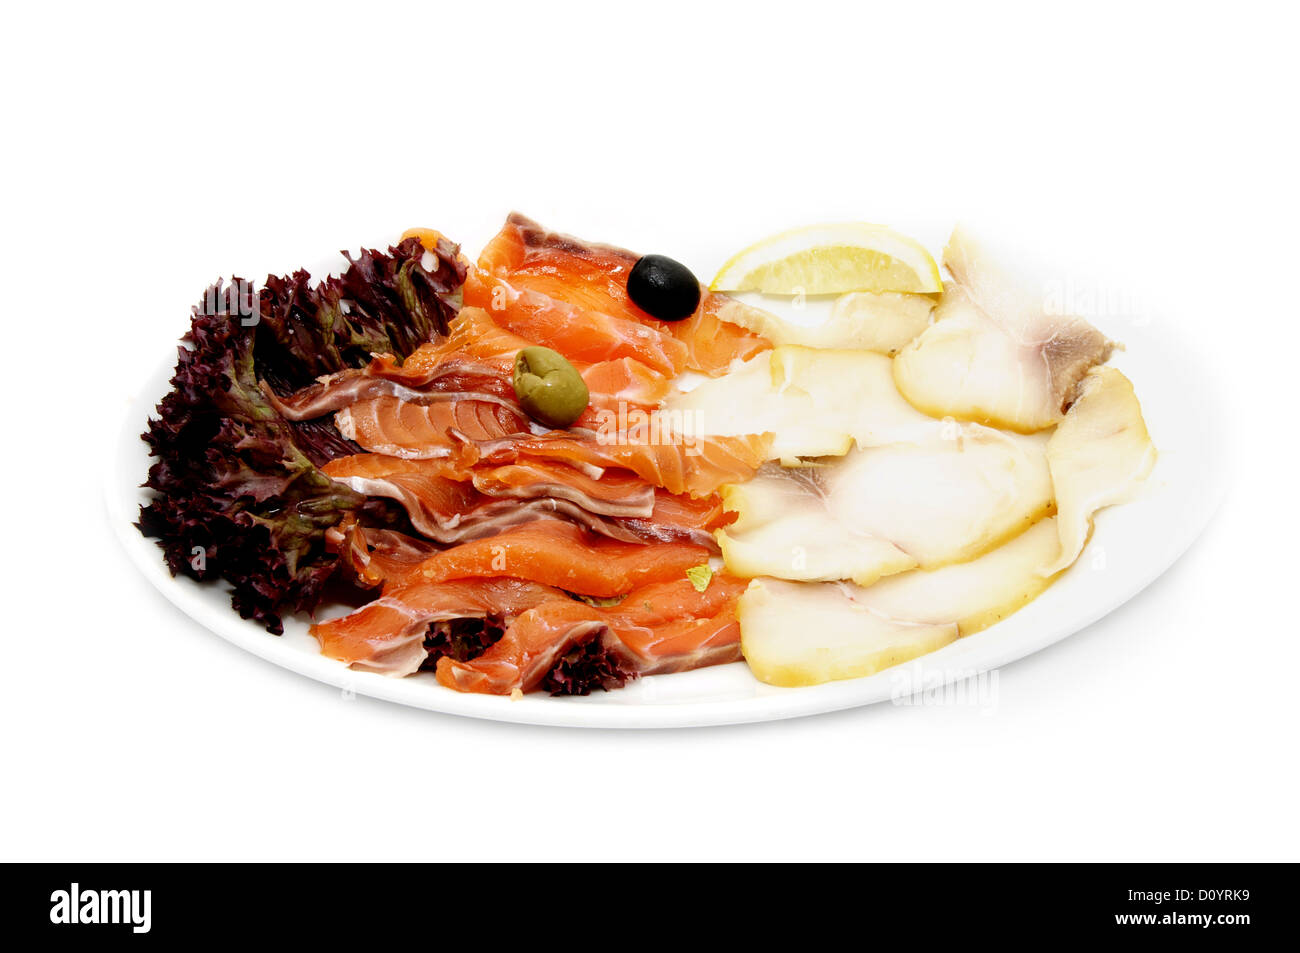 Sliced chum salmon and mackerel decorated with limes, lemons and olives  Stock Photo - Alamy